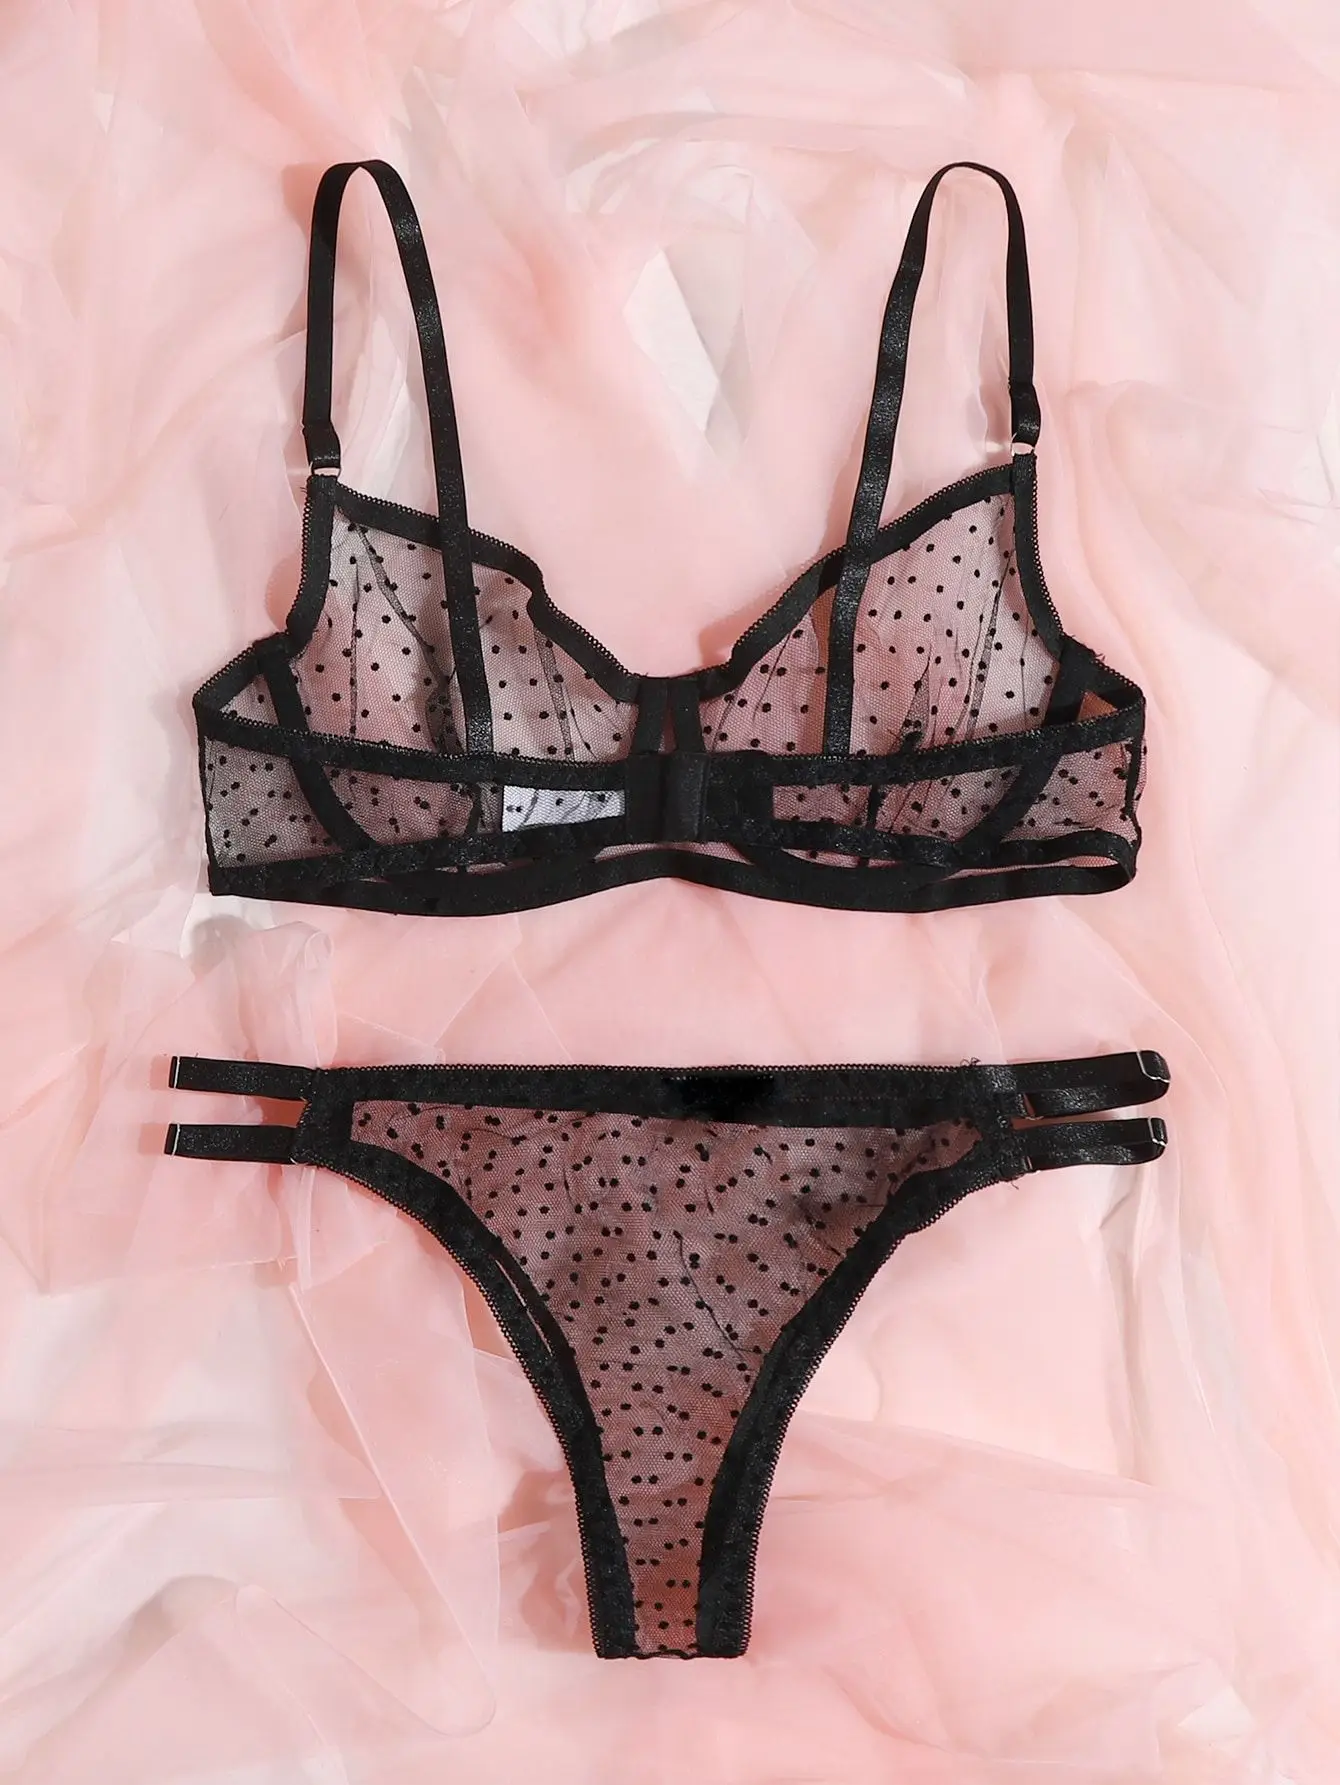 sexy bra panty Dot Mesh Lace Lingerie Set Underwire See Through Brassiere Sexy Underwear Bra and Panty Transparent Intimate bra and thong set